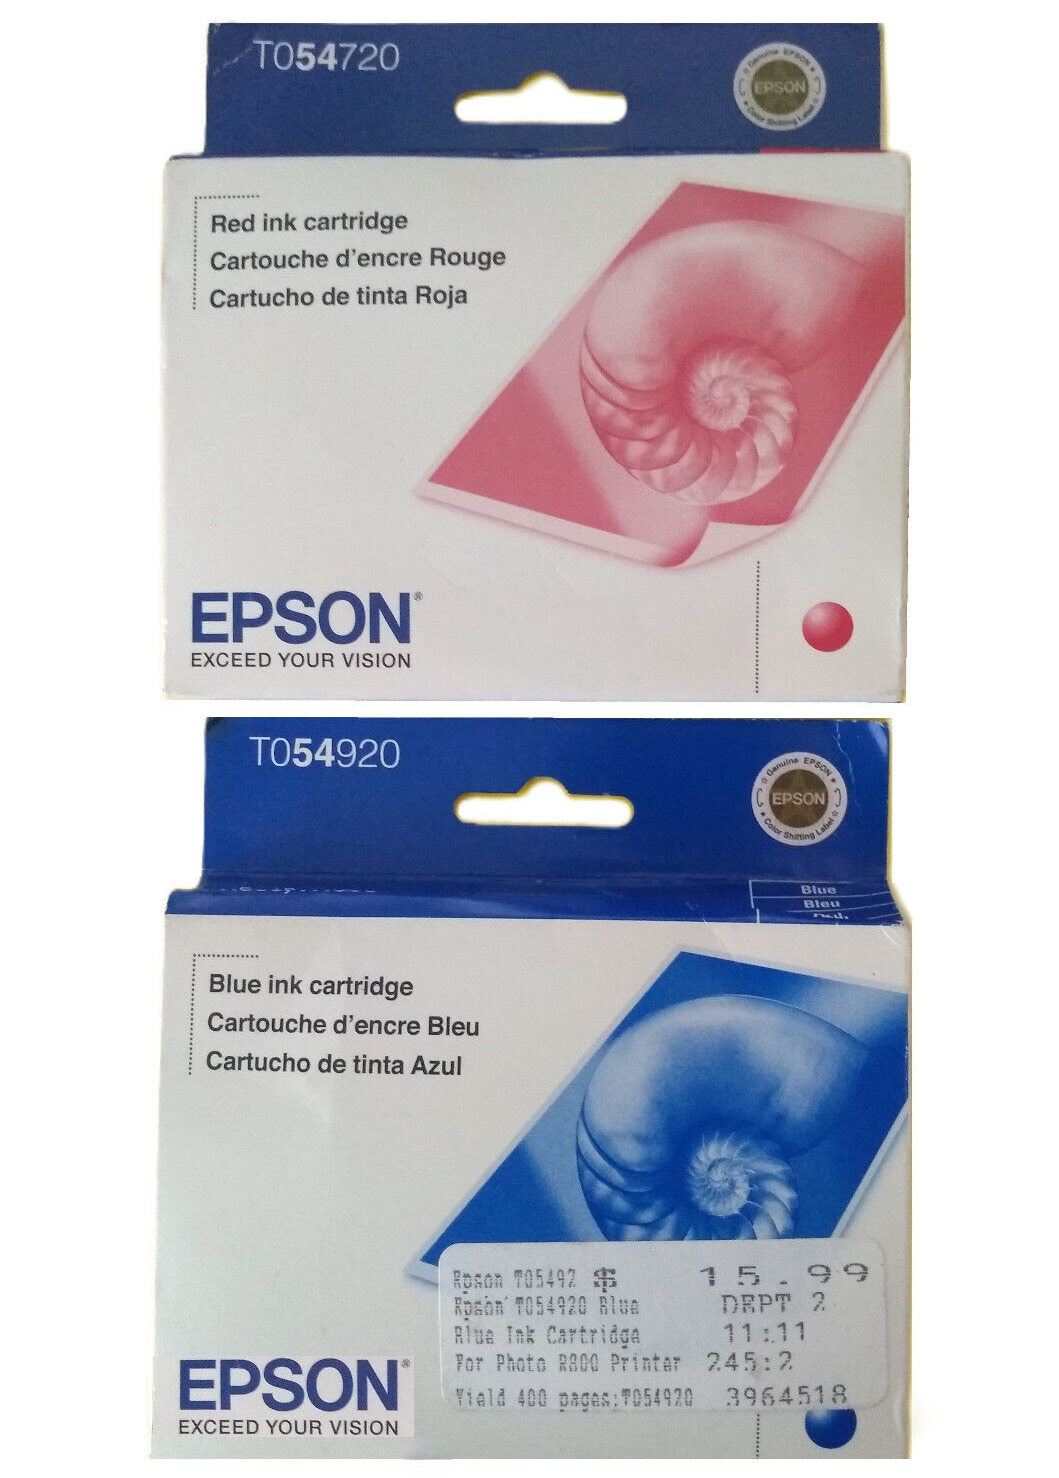 Epson OEM Red & Blue Ink Cartridges TO54720 TO54920 Factory Sealed Exp 2011/2013